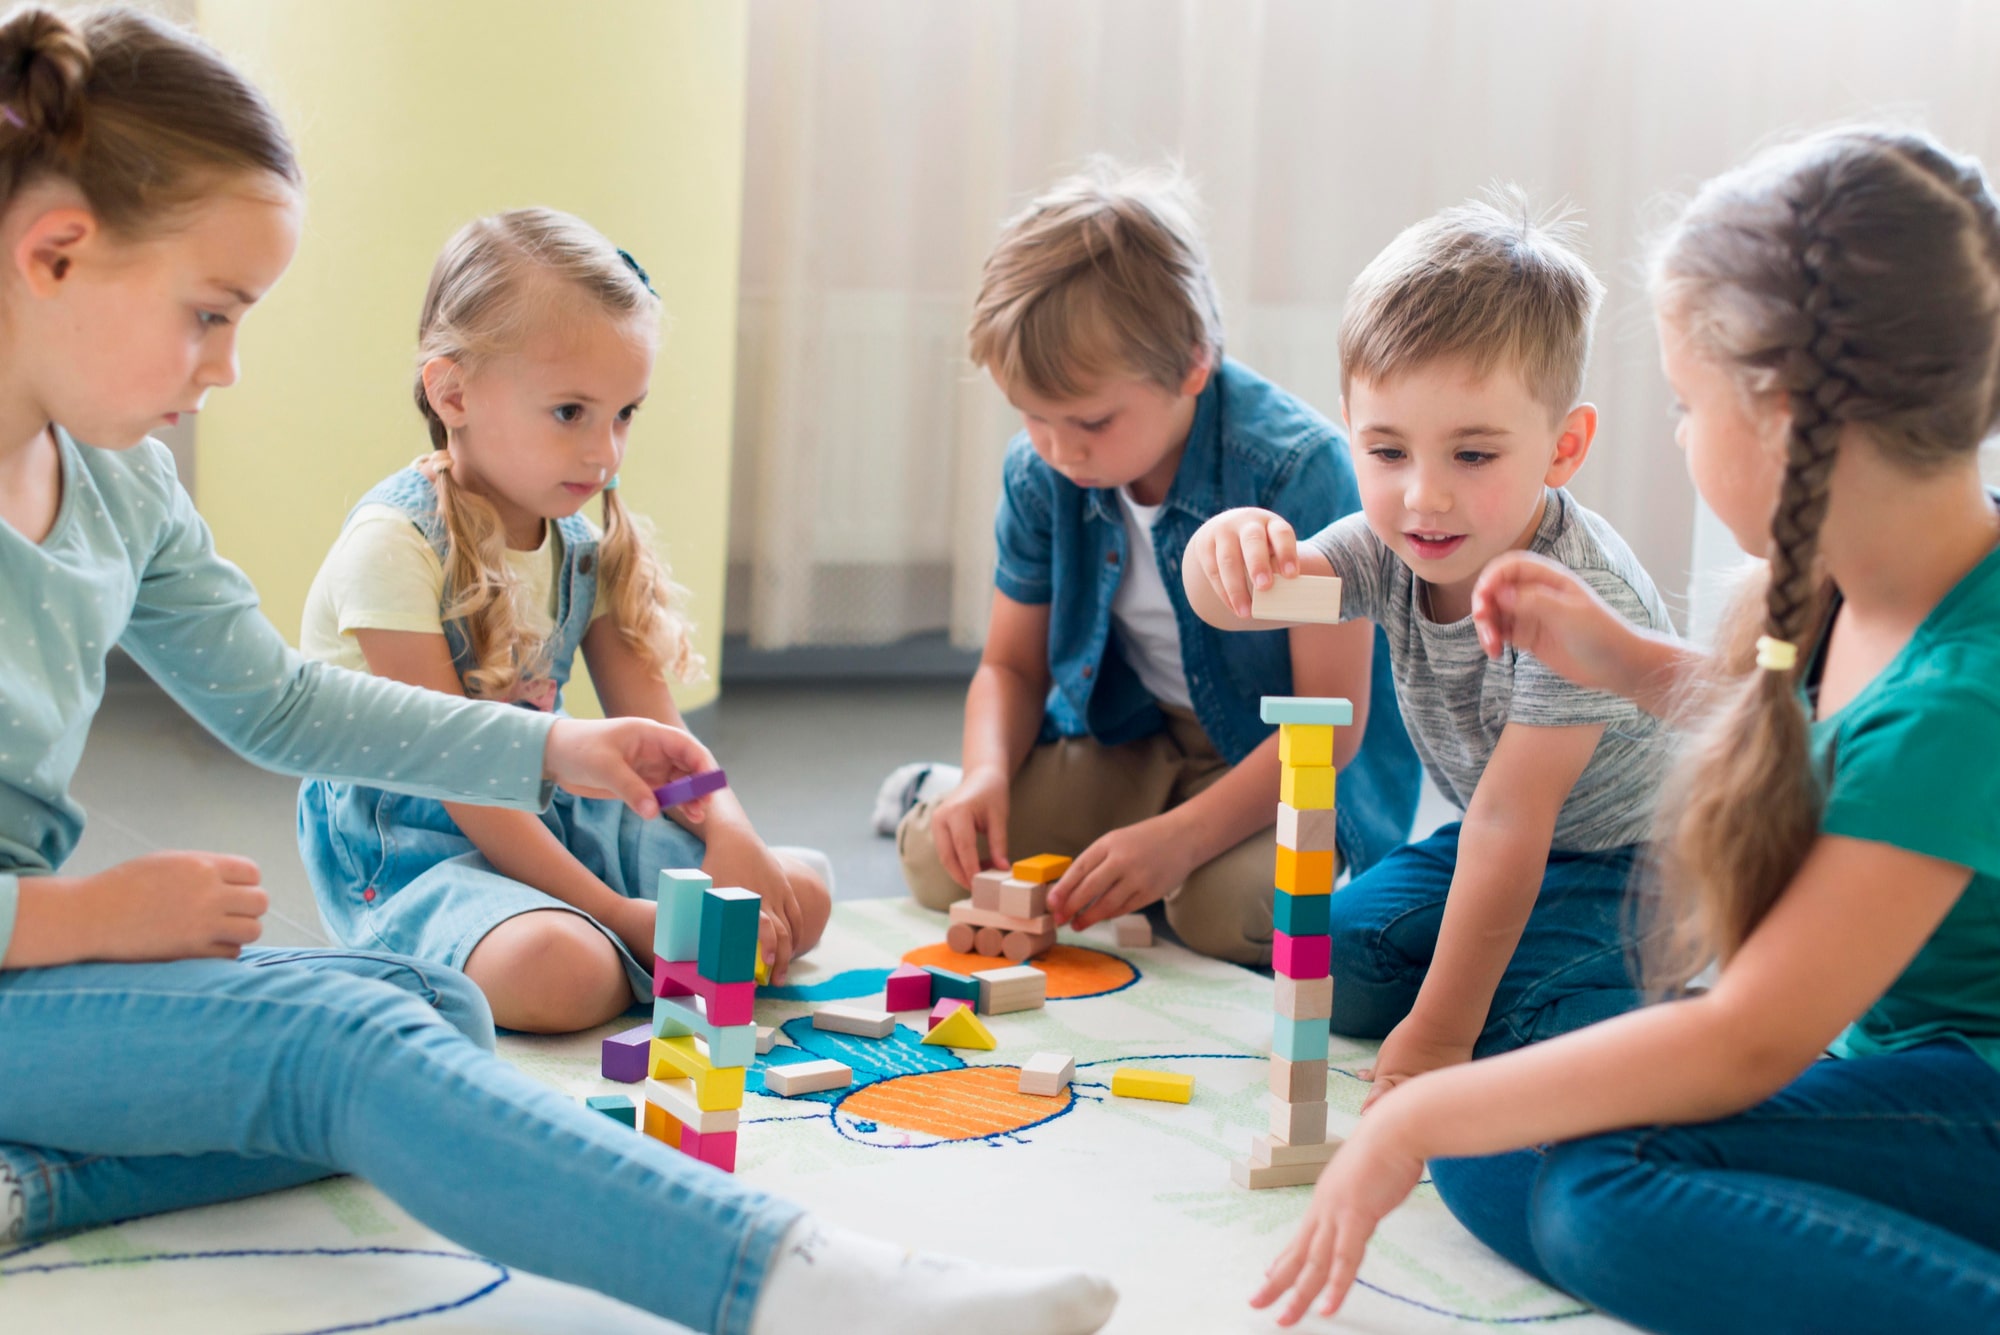 Bellandur Preschool and Daycare - Providing Top-notch Early Education and Childcare Services